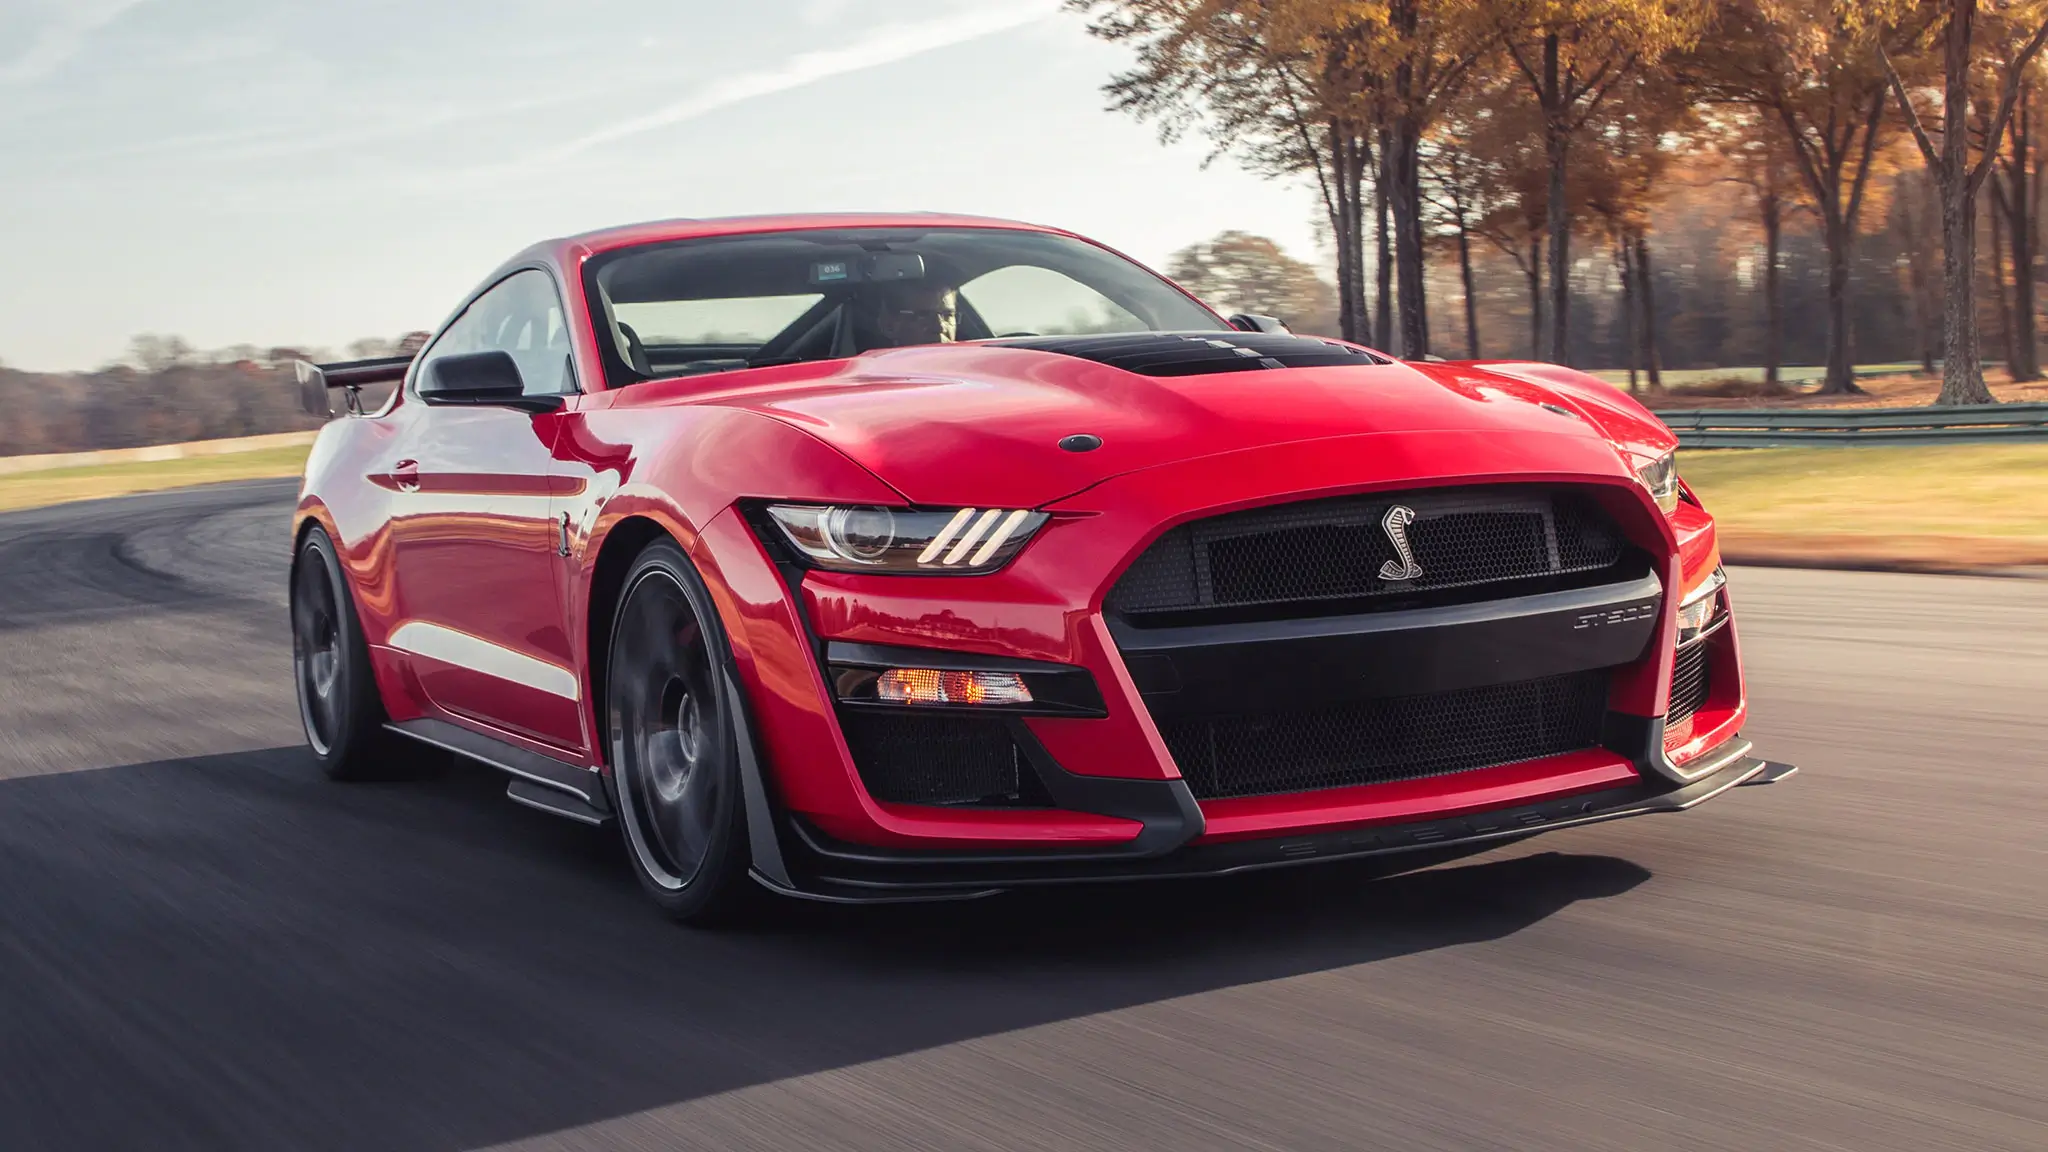 Mustang gt 2024. Форд Мустанг 2022. Форд Мустанг gt 500 2020. Форд Мустанг Шелби gt 500 2020. Ford Mustang Shelby gt500 2020.